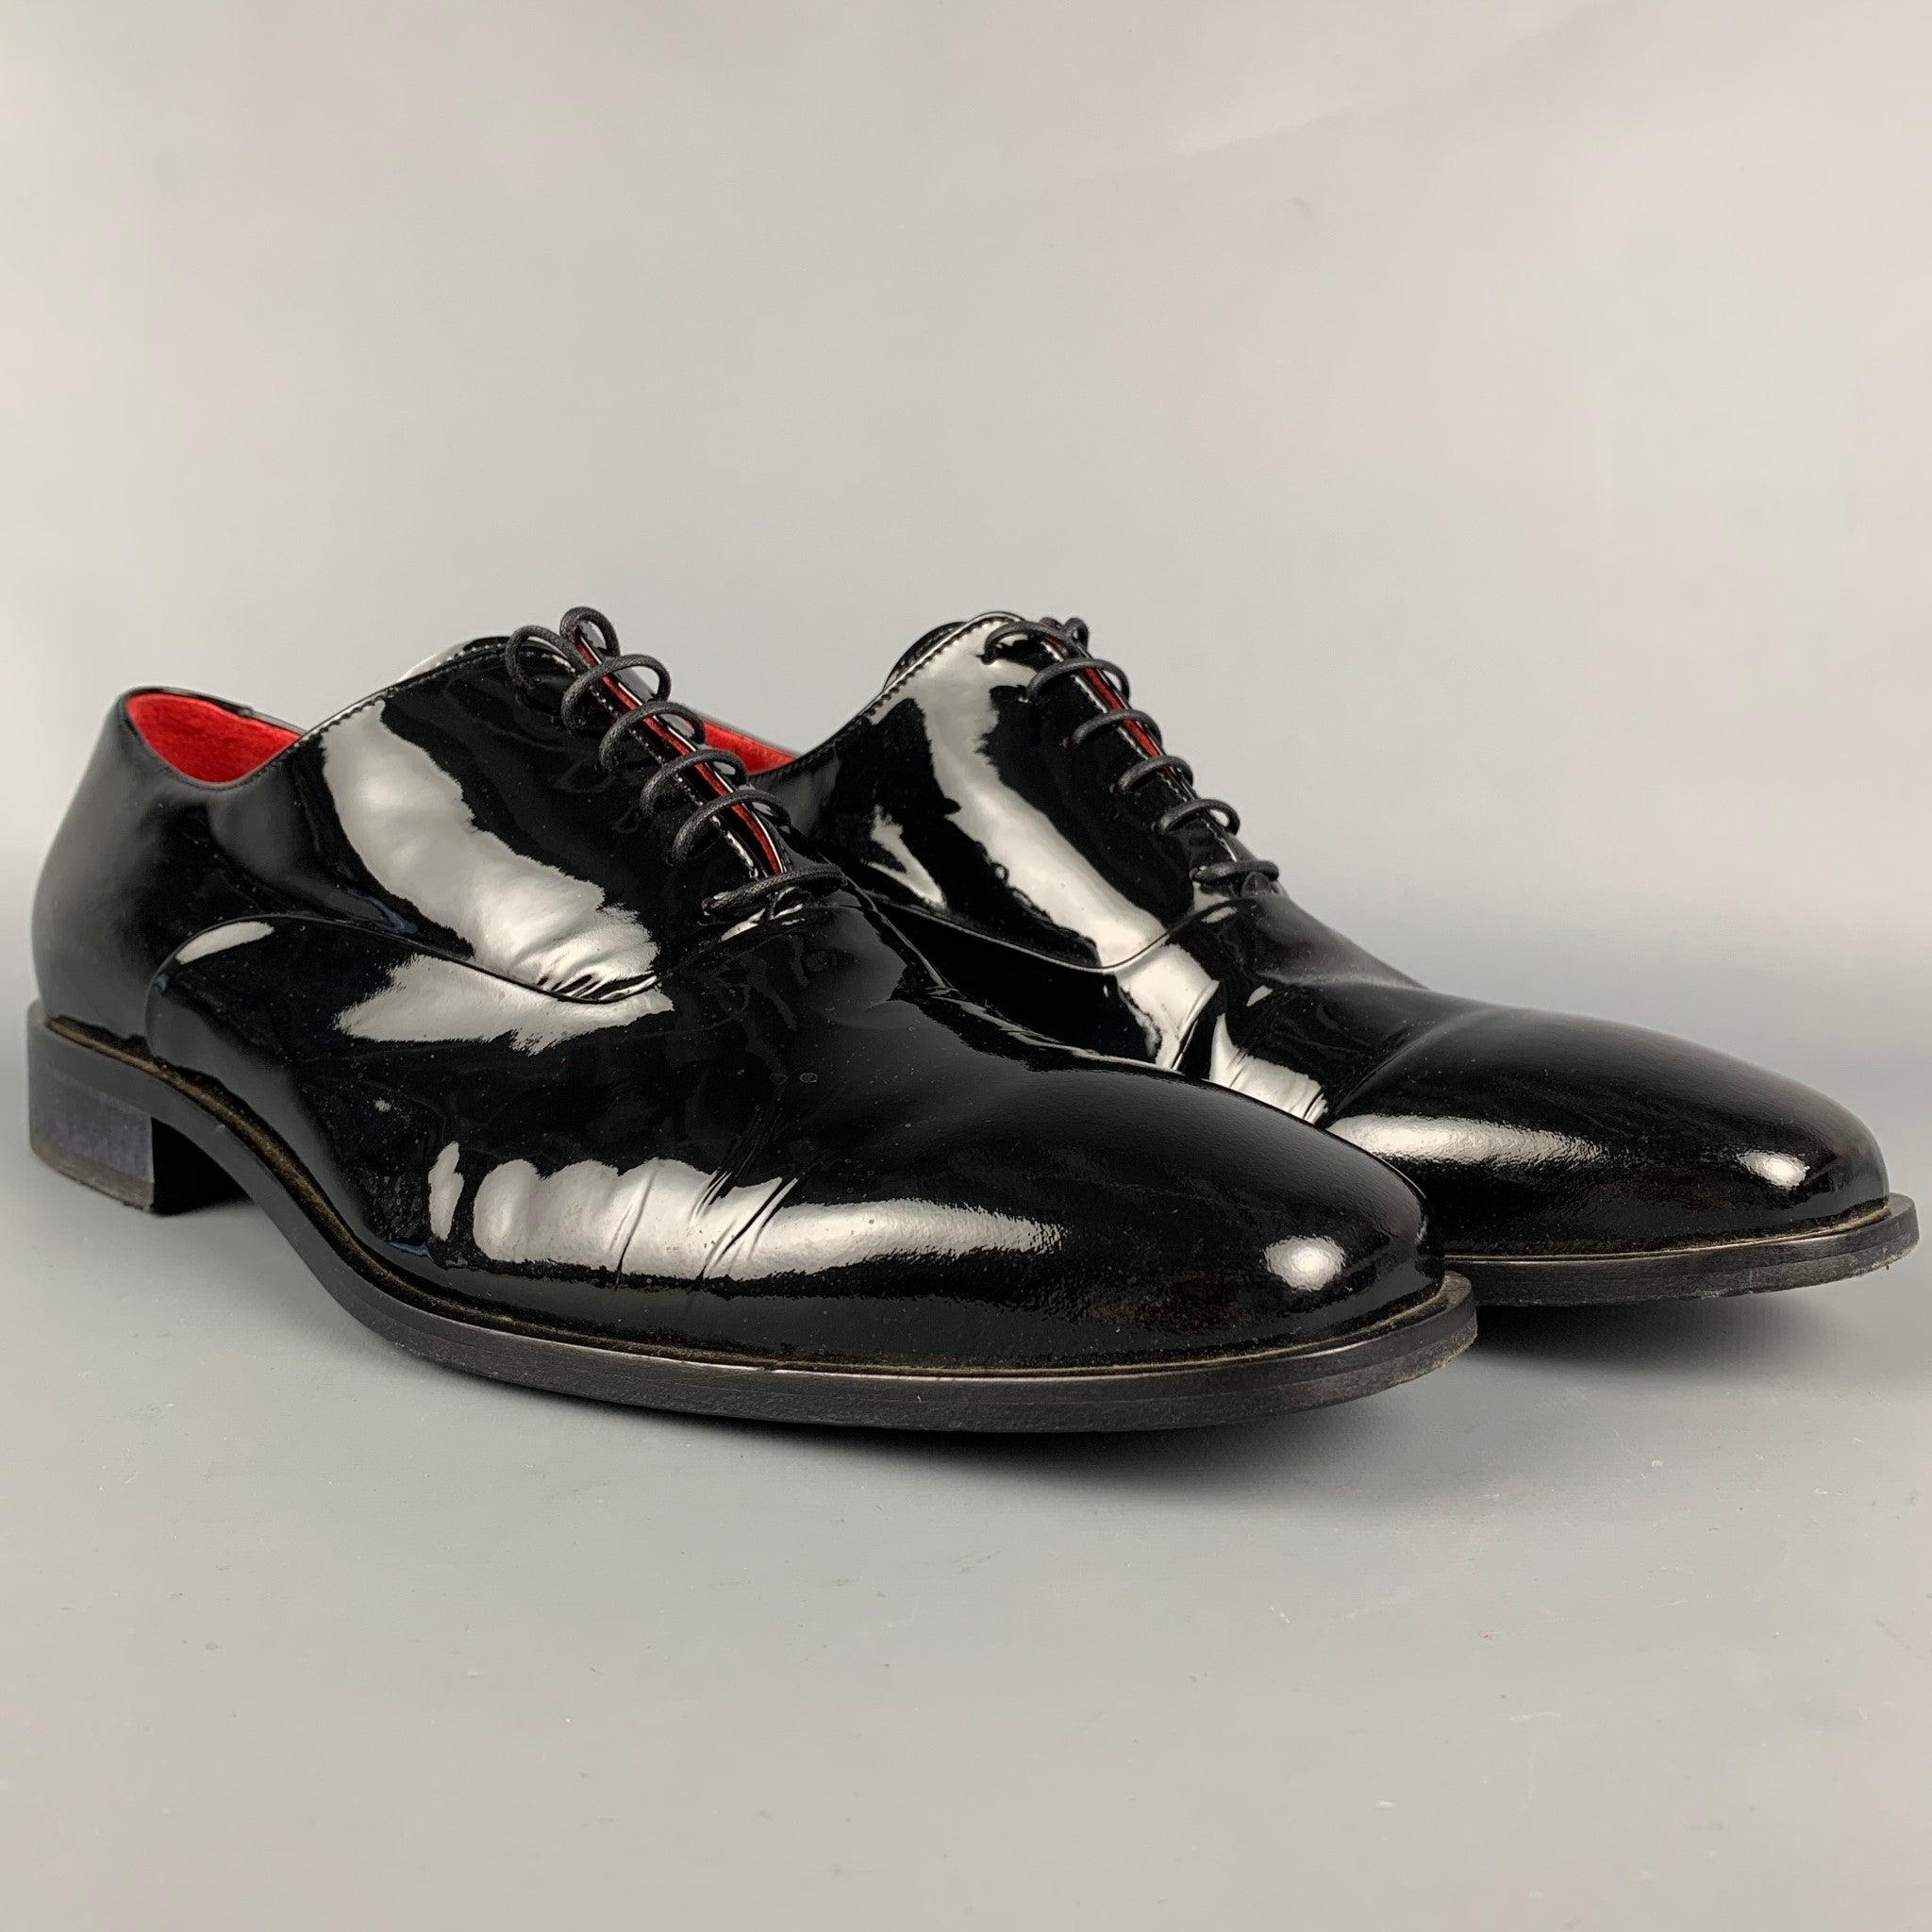 BARNEY'S NEW YORK shoes comes in black patent leather featuring a square toe and a lace up closure. Includes box. Made in Italy.
 Very Good Pre-Owned Condition. 
 

 Marked:  1059 12 MOutsole: 12.5 inches x 4.25 inches  
  
  
  
 Sui Generis